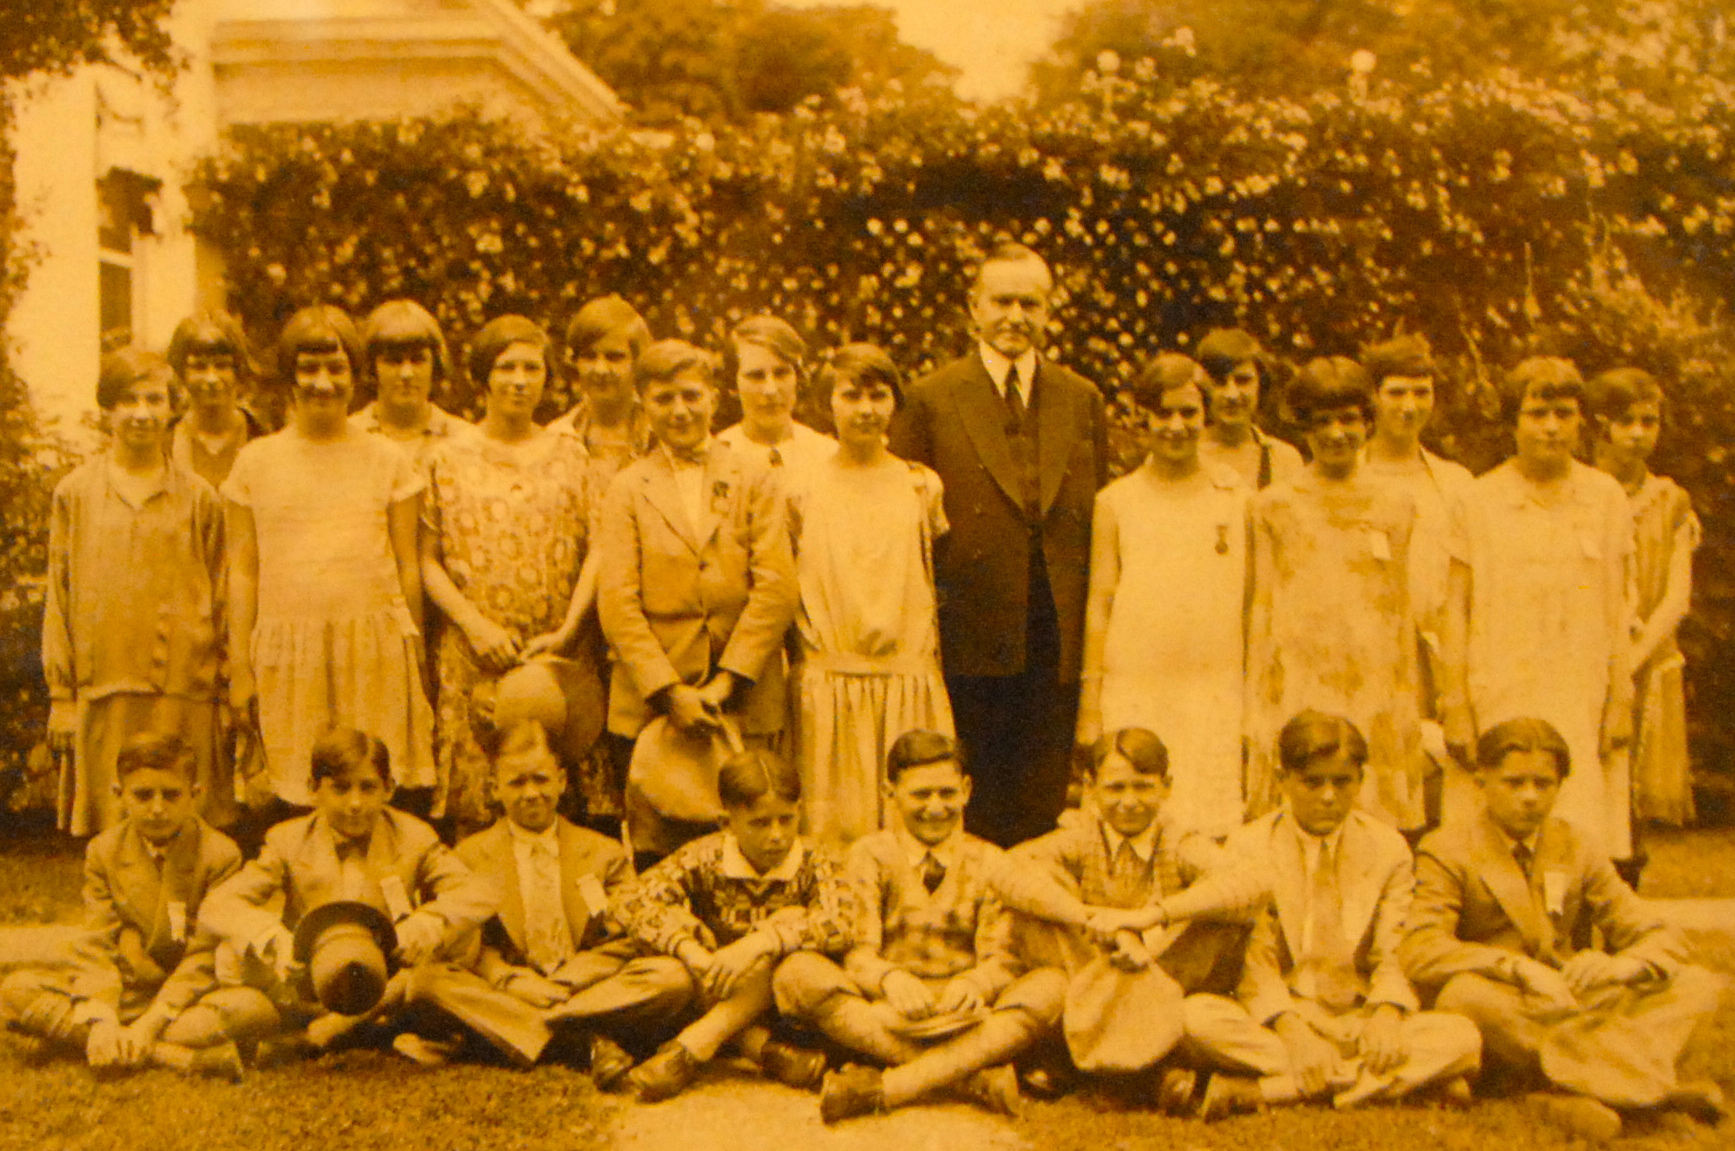 US President Calvin Coolidge posed with national spelling bee winners in 1926. To his right is the winner of the second national spelling bee ever held, 13-year-old Pauline “Polly” Bell from Clarkson, just north of Leitchfield in Grayson County, Ky. And to her right is the winner from the year before who was also from Kentucky, Frank Neuhouser, who won the first spelling bee ever held. He is also still alive and a resident of Louisville.” (Campbellsville University photo by Linda Waggener)